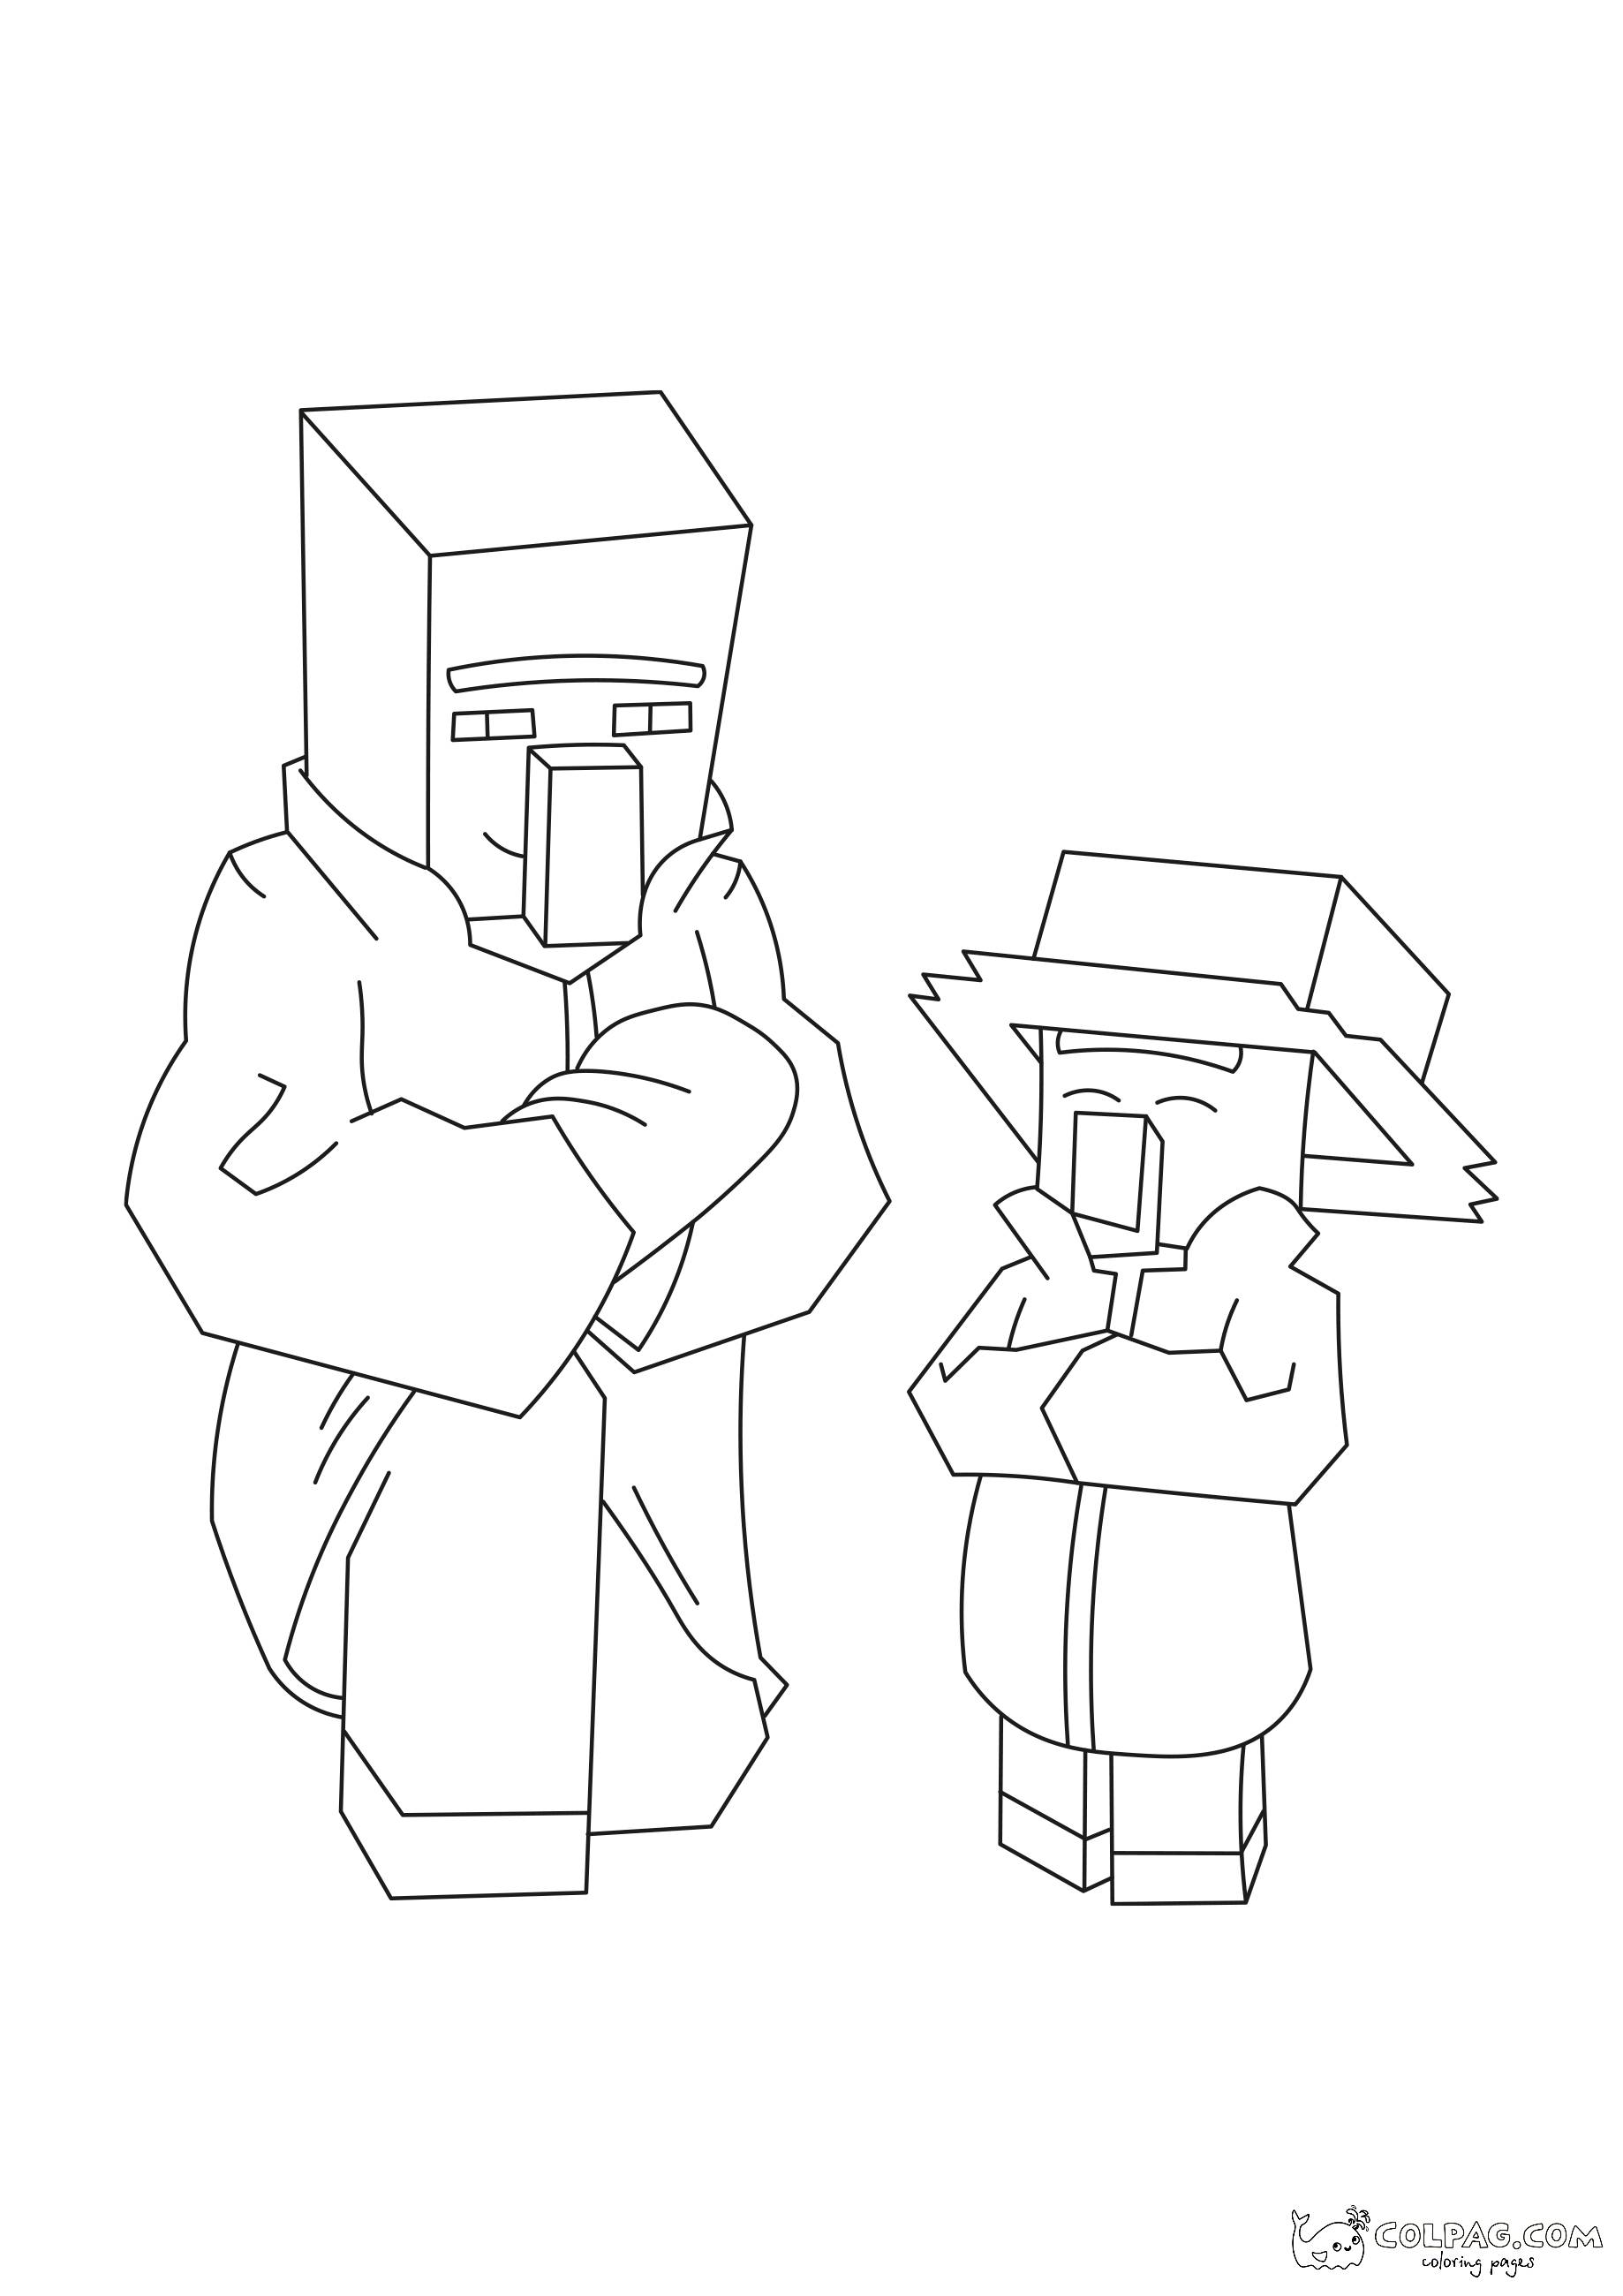 villagers-minecraft-coloring-page-colpag